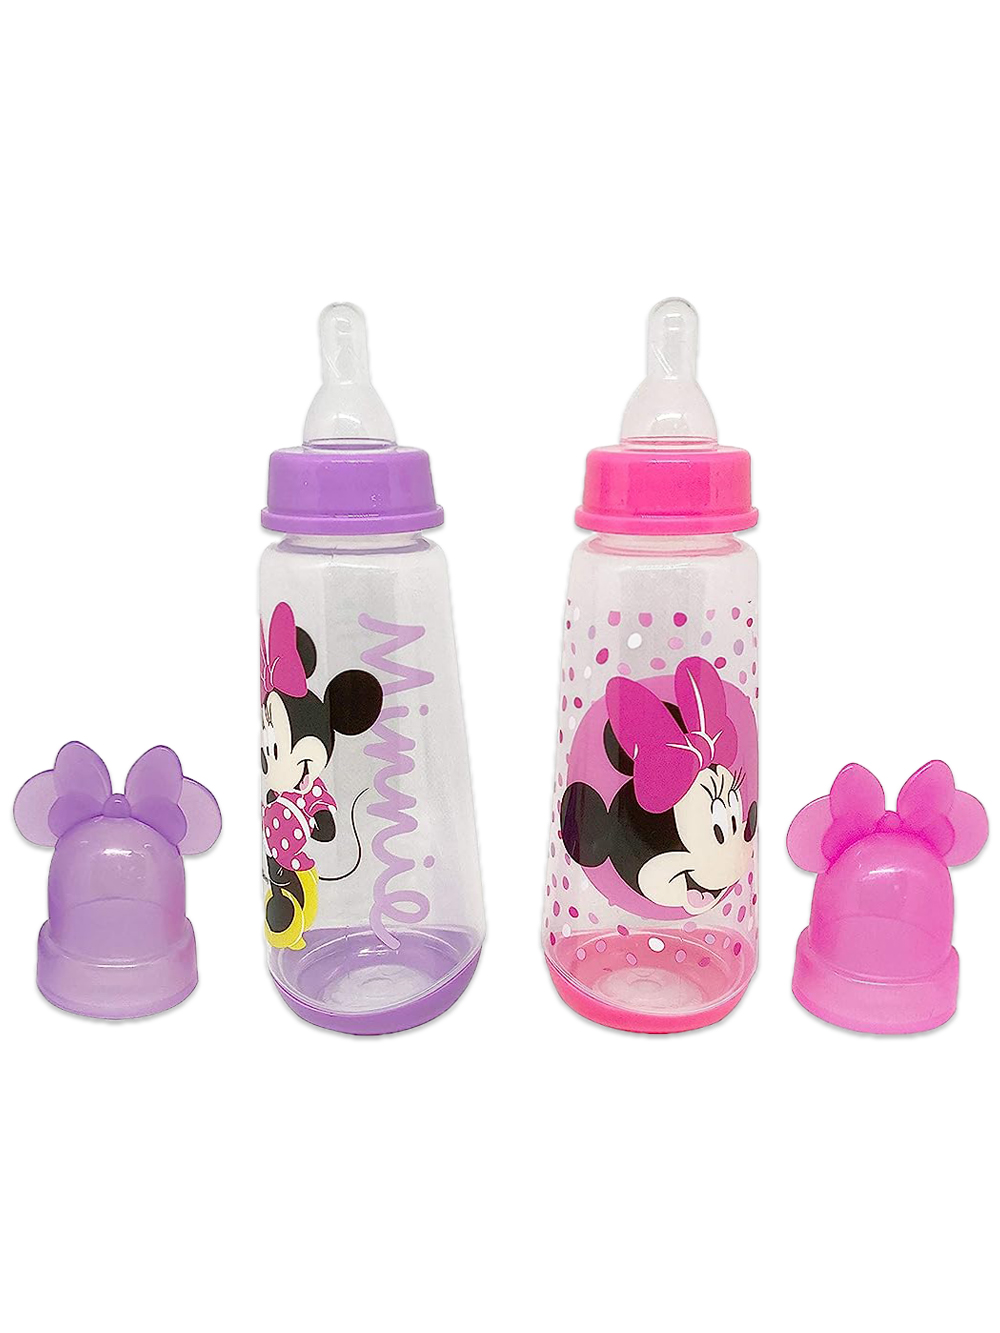 Disney Minnie Mouse Baby Girls' 6-Pack Spoon Set - Pink/Multi, One Size 